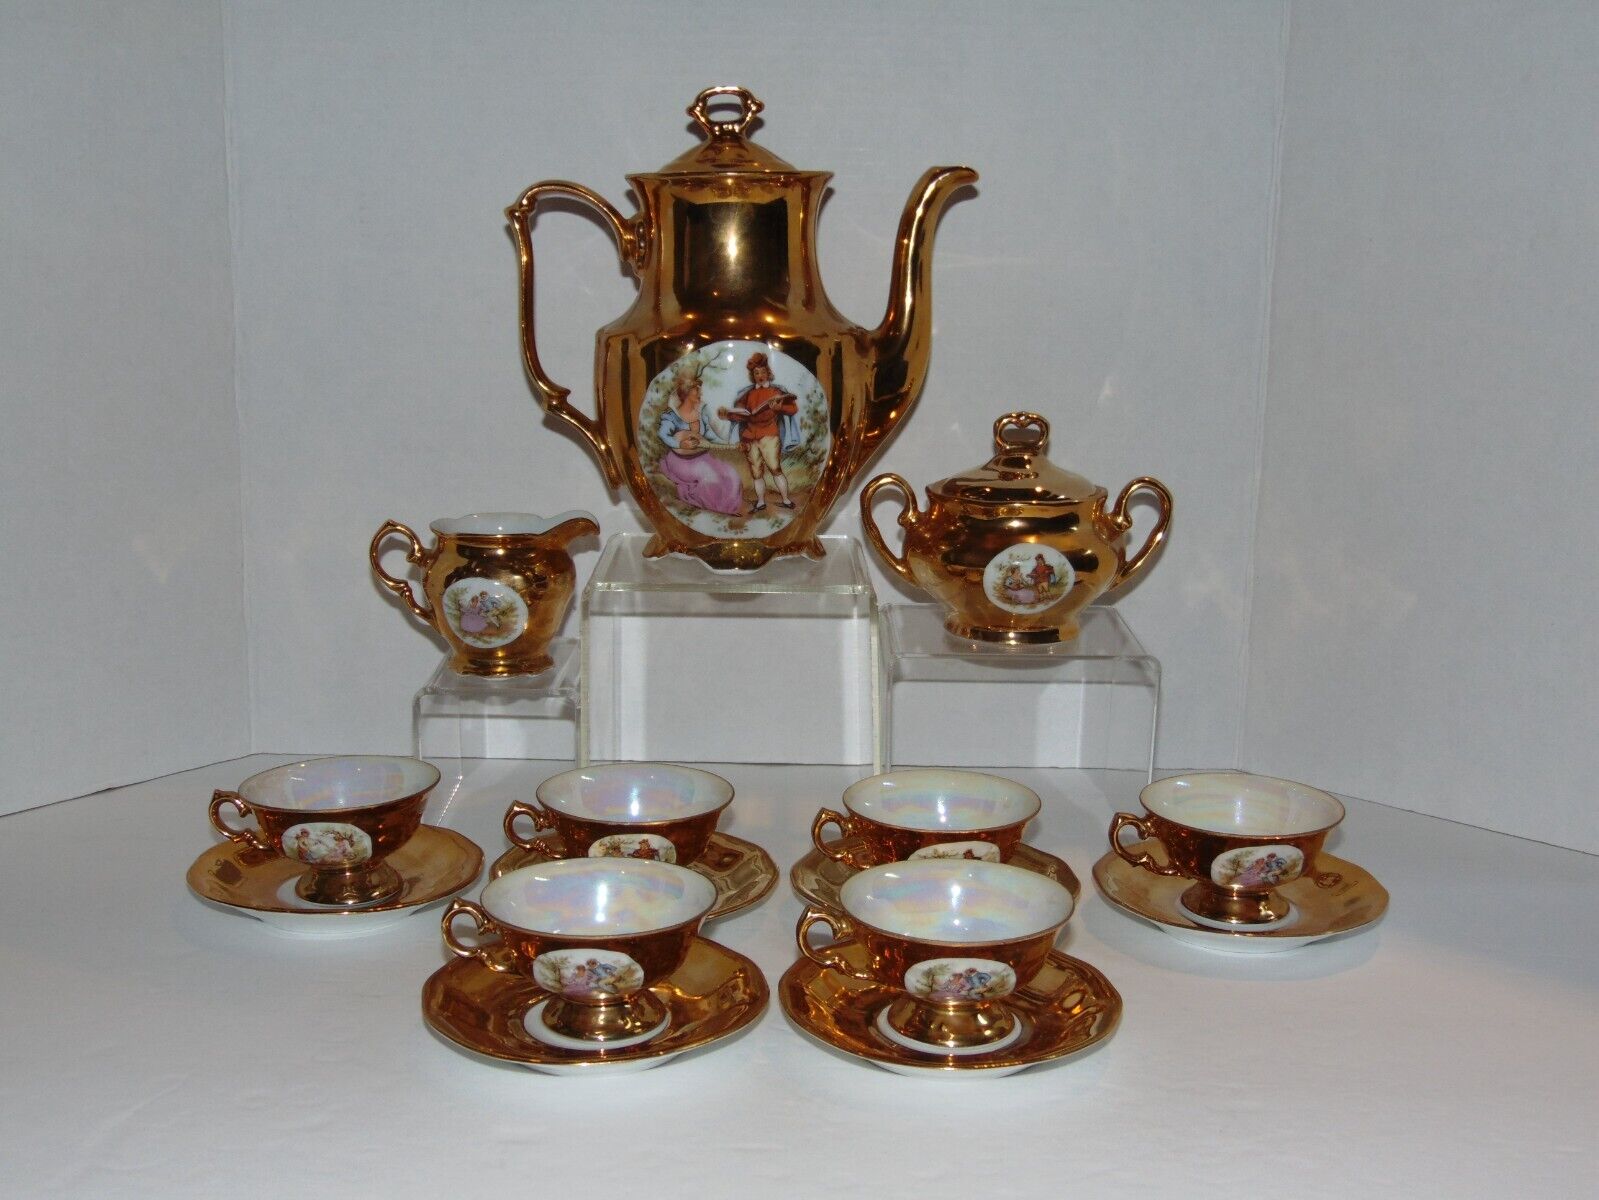 COMPLETE VTG. WALBRZYCH POLAND Gold Lustre Courting Couple Decal Coffee/Tea Set